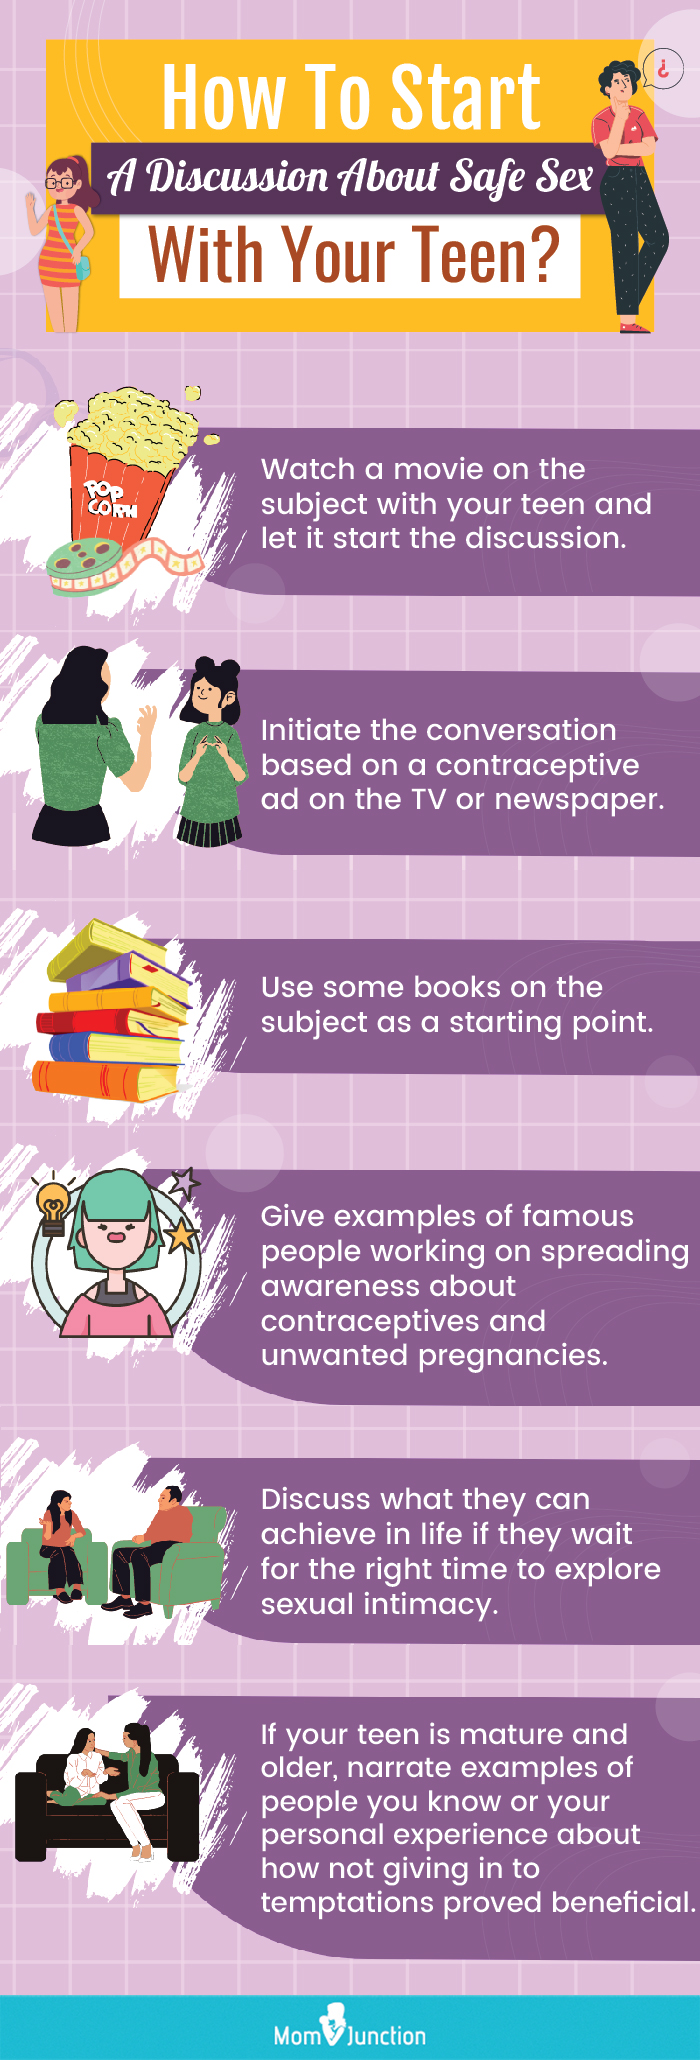 how to start a discussion about safe sex with your teen (infographic)